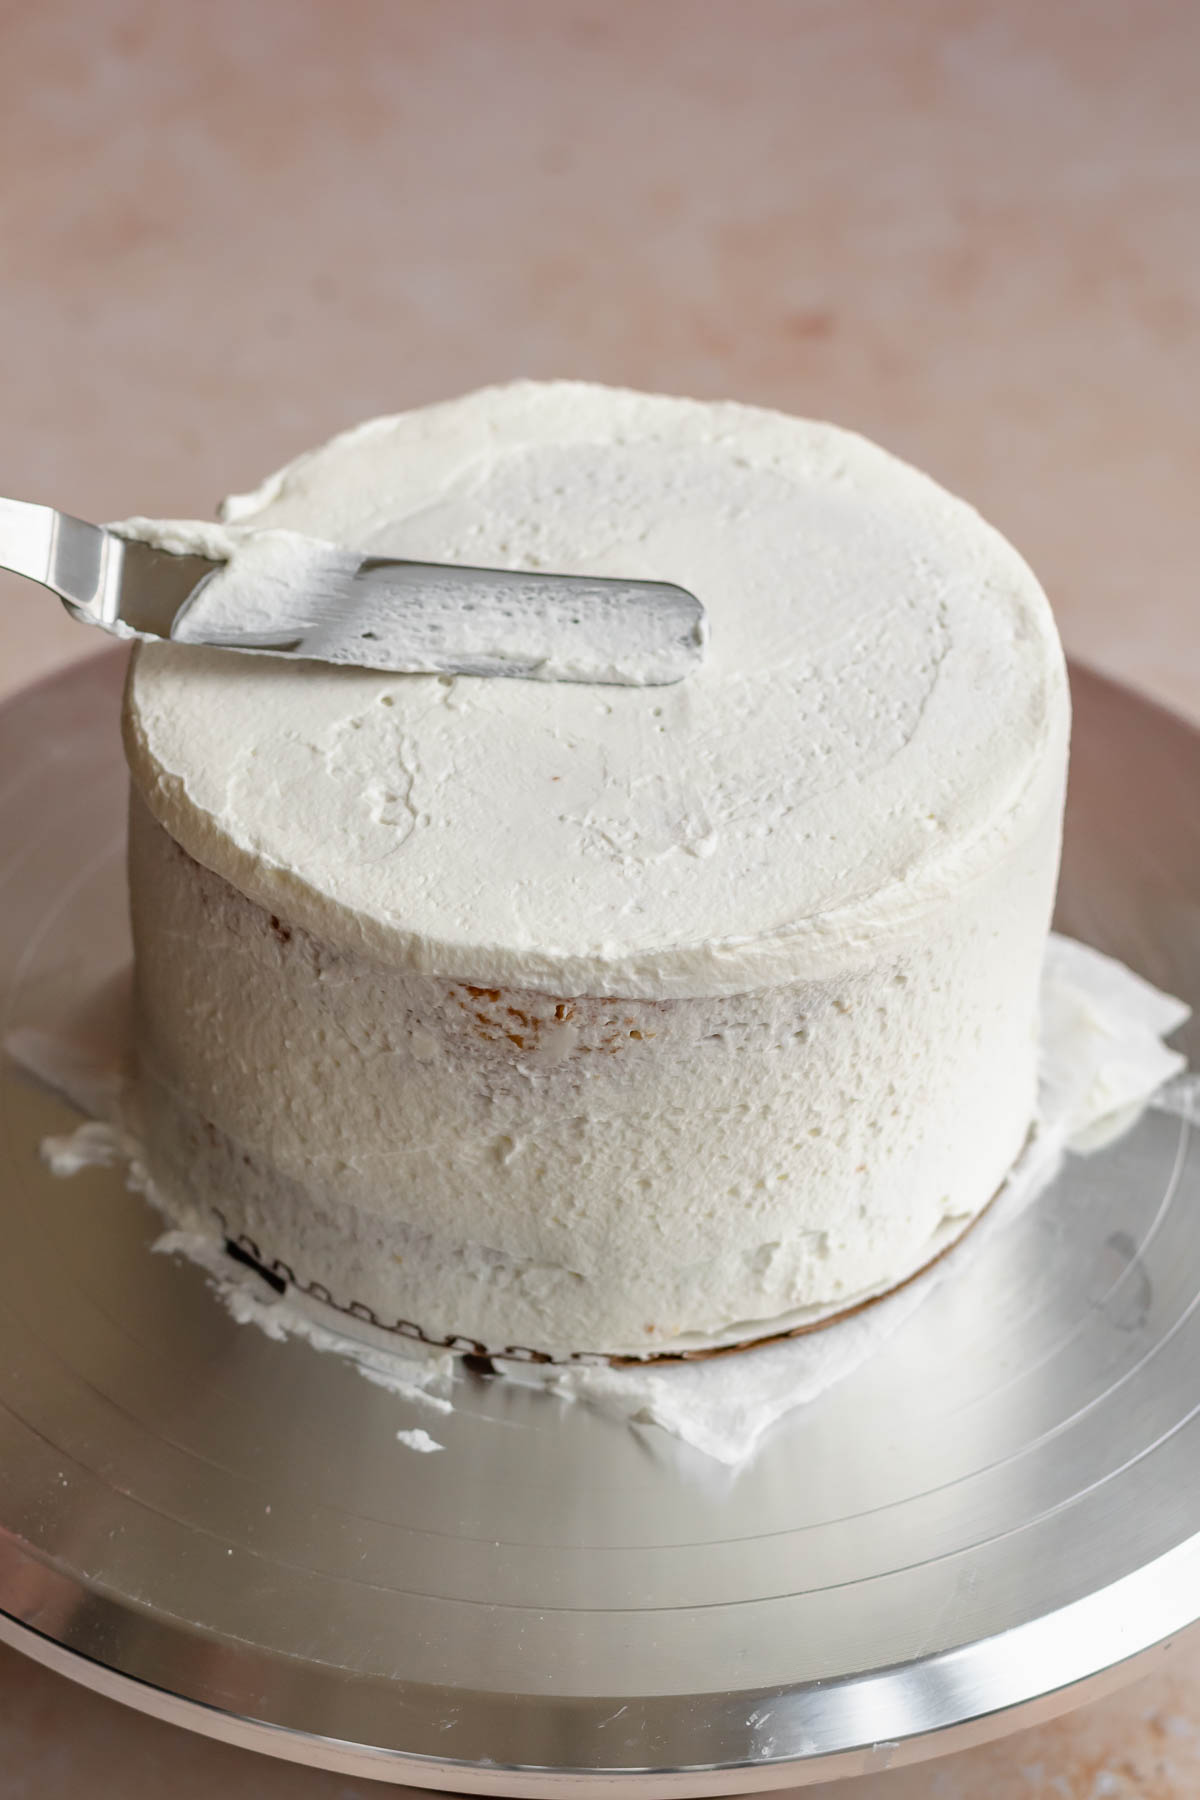 An offset spatula smooths frosting on top of the cake.